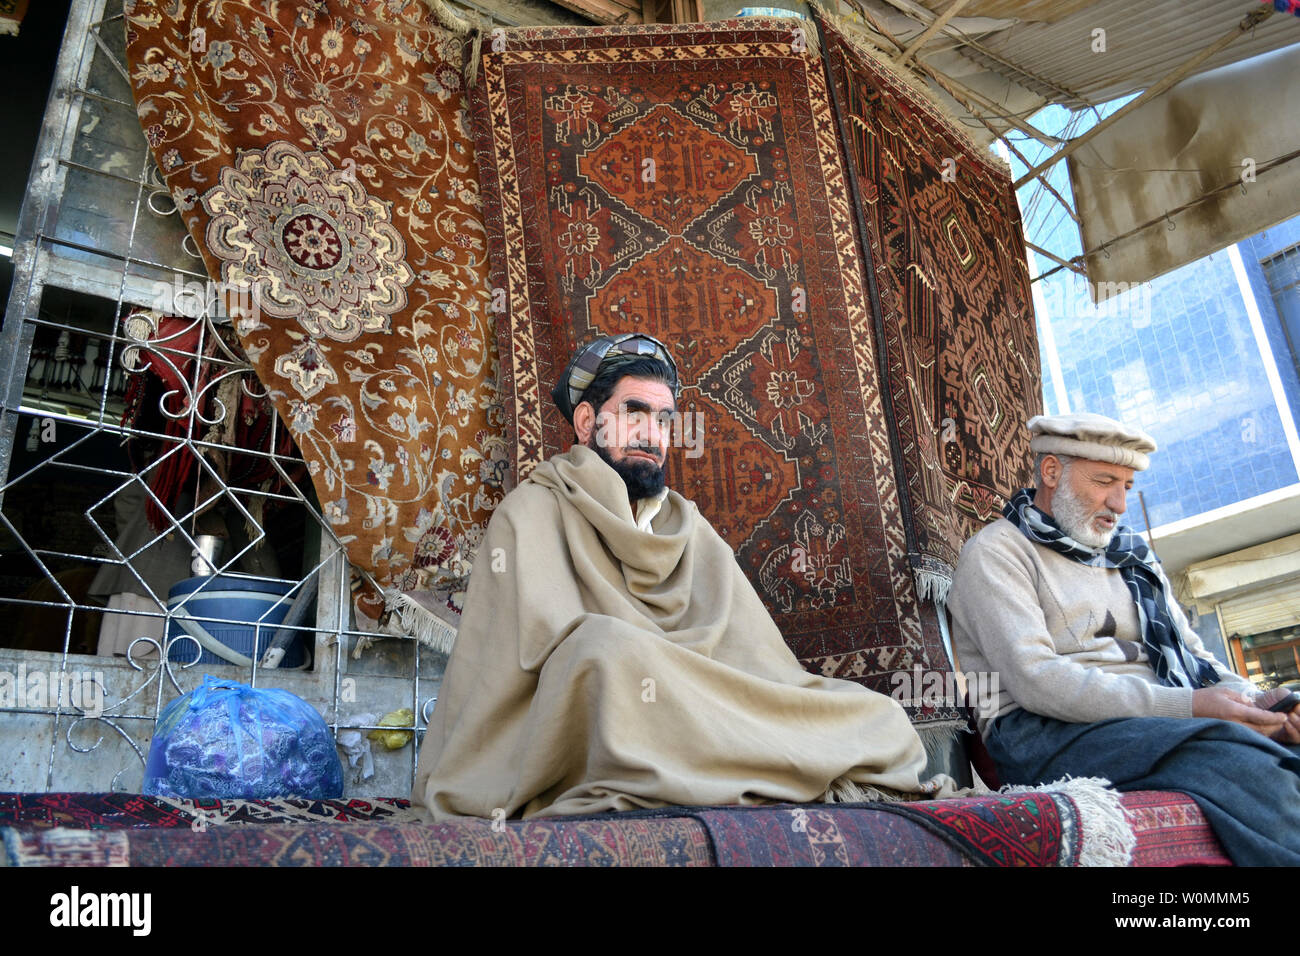 Men sit on carpets in the border town of Quetta, Pakistan, in the Baluchistan province, January 18, 2014. Balochistan, due to its tribal culture that prefers carpets over chairs and sofas, has always been partial to rugs and is a huge buyer of carpets from both Afghanistan and Iran, which share its borders. UPI/Matiullah Stock Photo